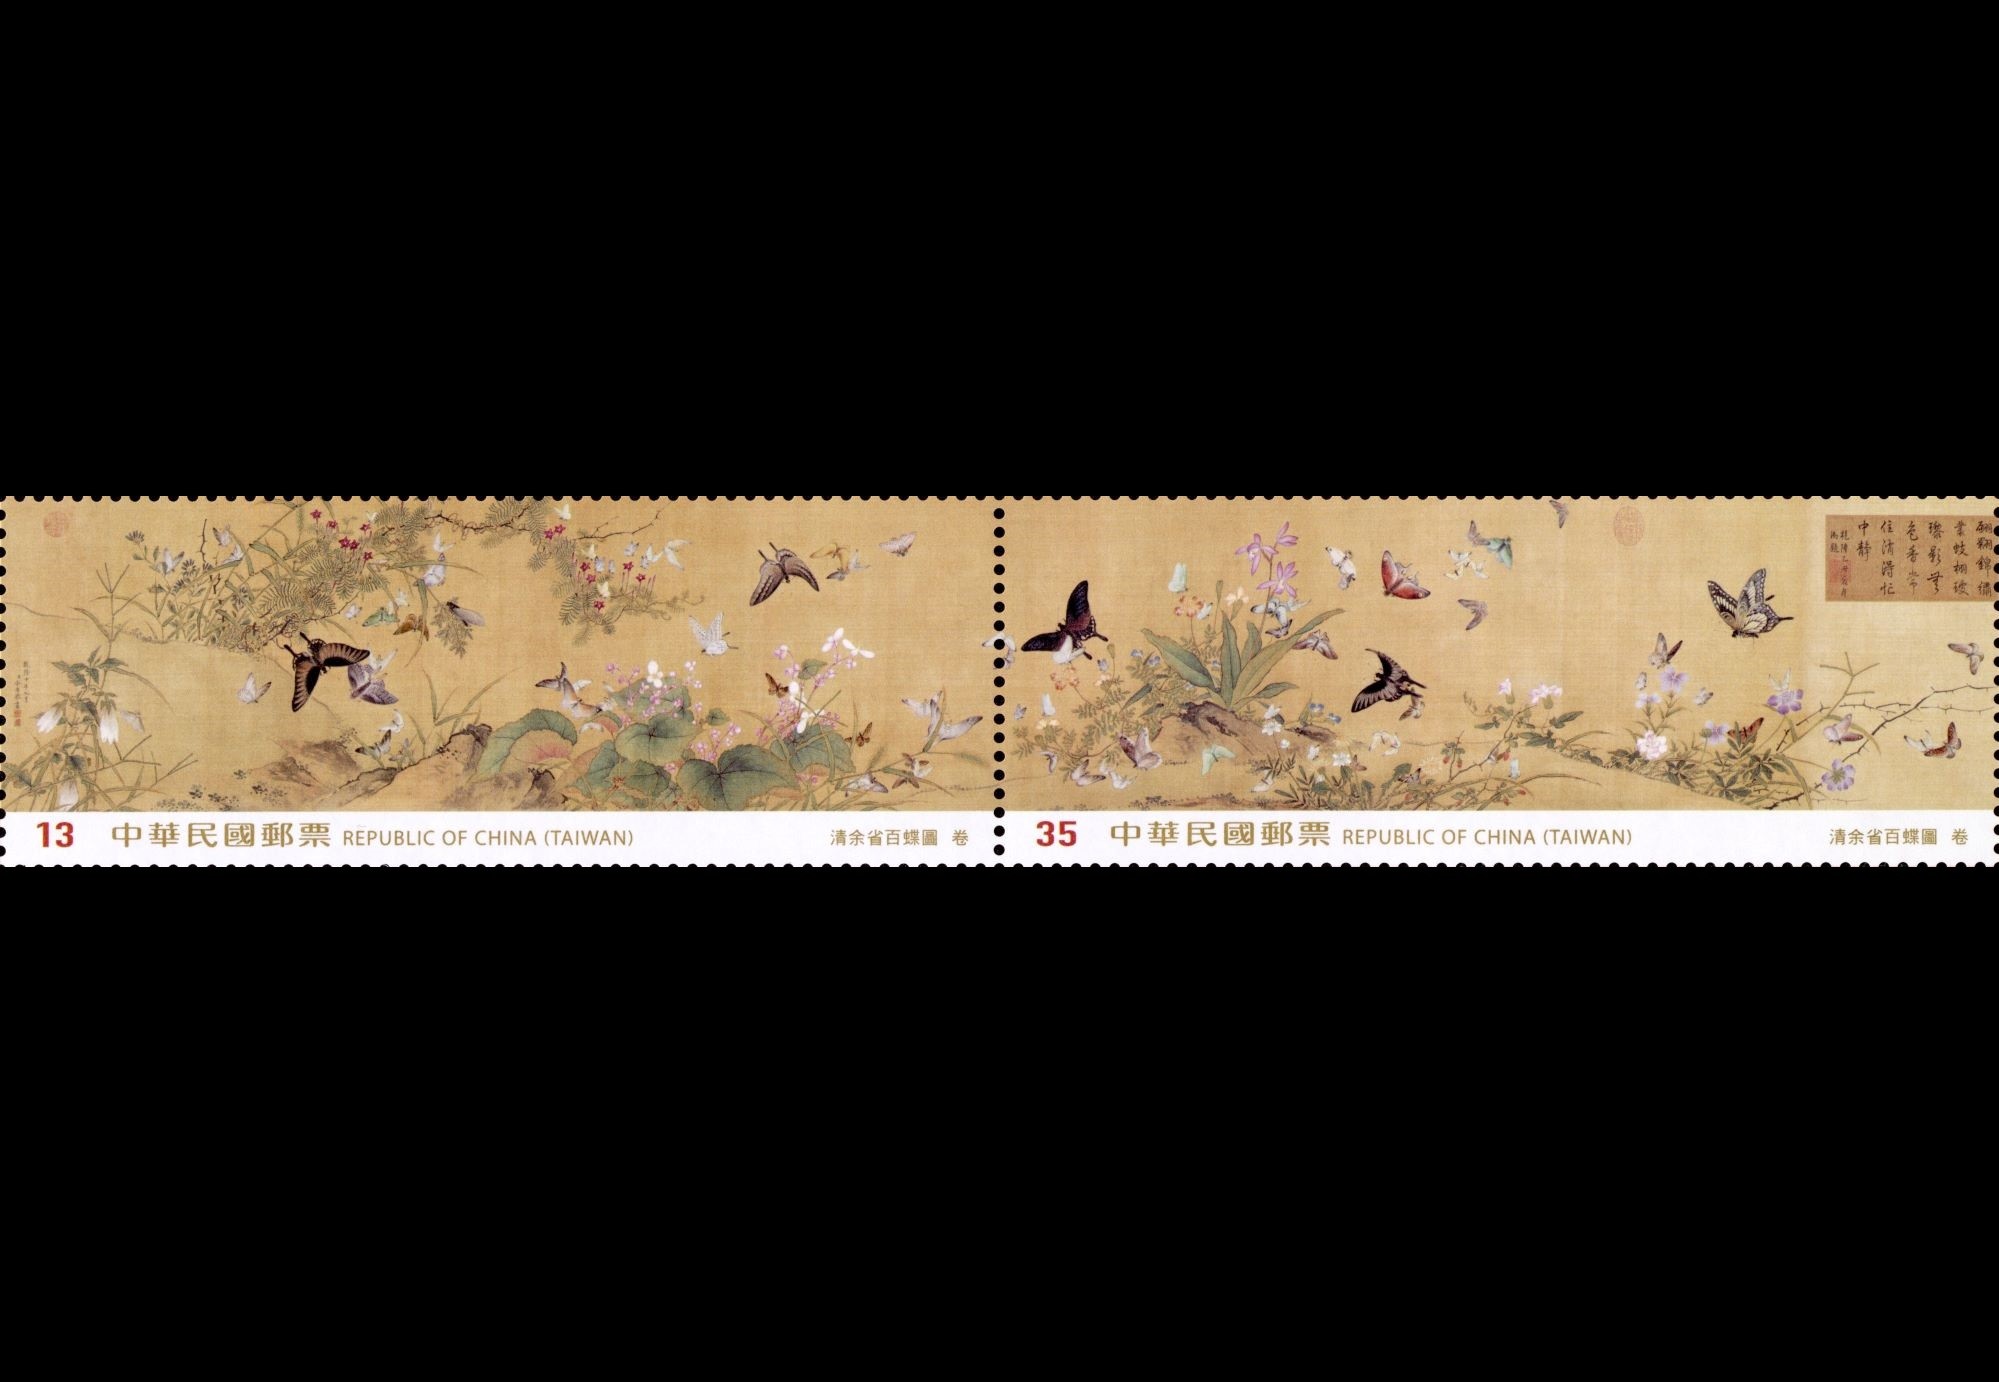 Sp.741 TAIPEI 2023 – 39th Asian International Stamp Exhibition Postage Stamps: Myriad Butterflies stamp pic